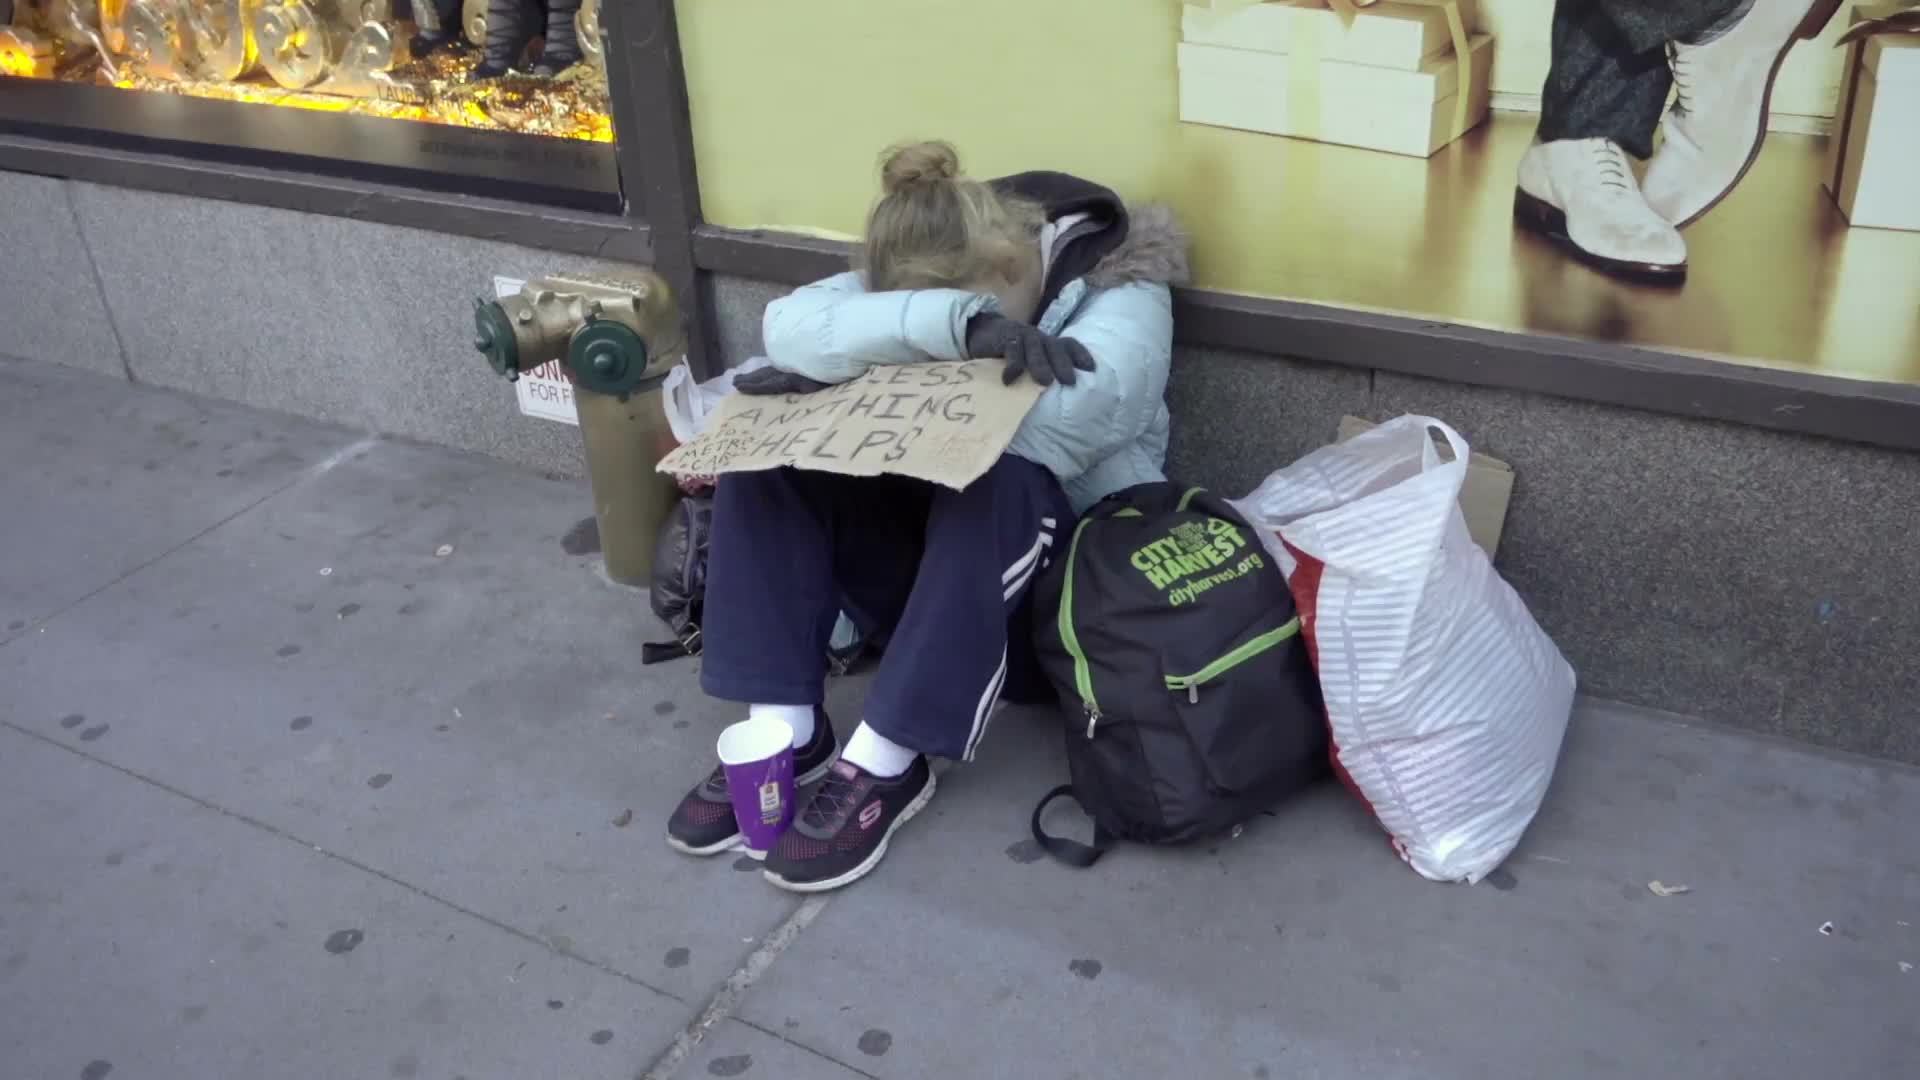 homeless woman with help sign sitting on sidewalk - hopeless and destitute in cold winter - New York City NYC 1080 HD